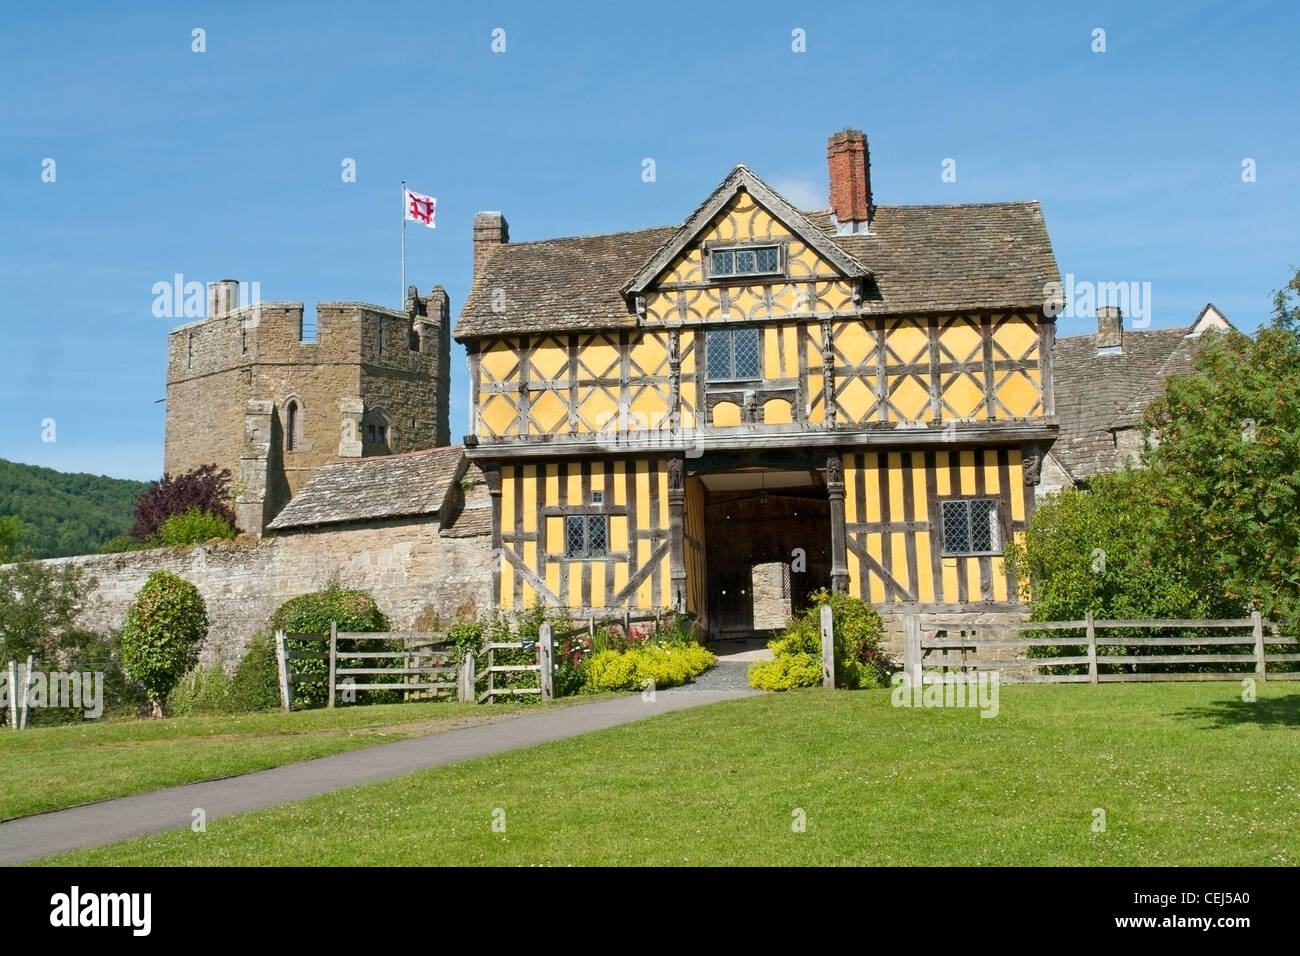 The gatehouse at Stokesay Castle,  a fortified manor house in Stokesay,Shropshire Stock Photo